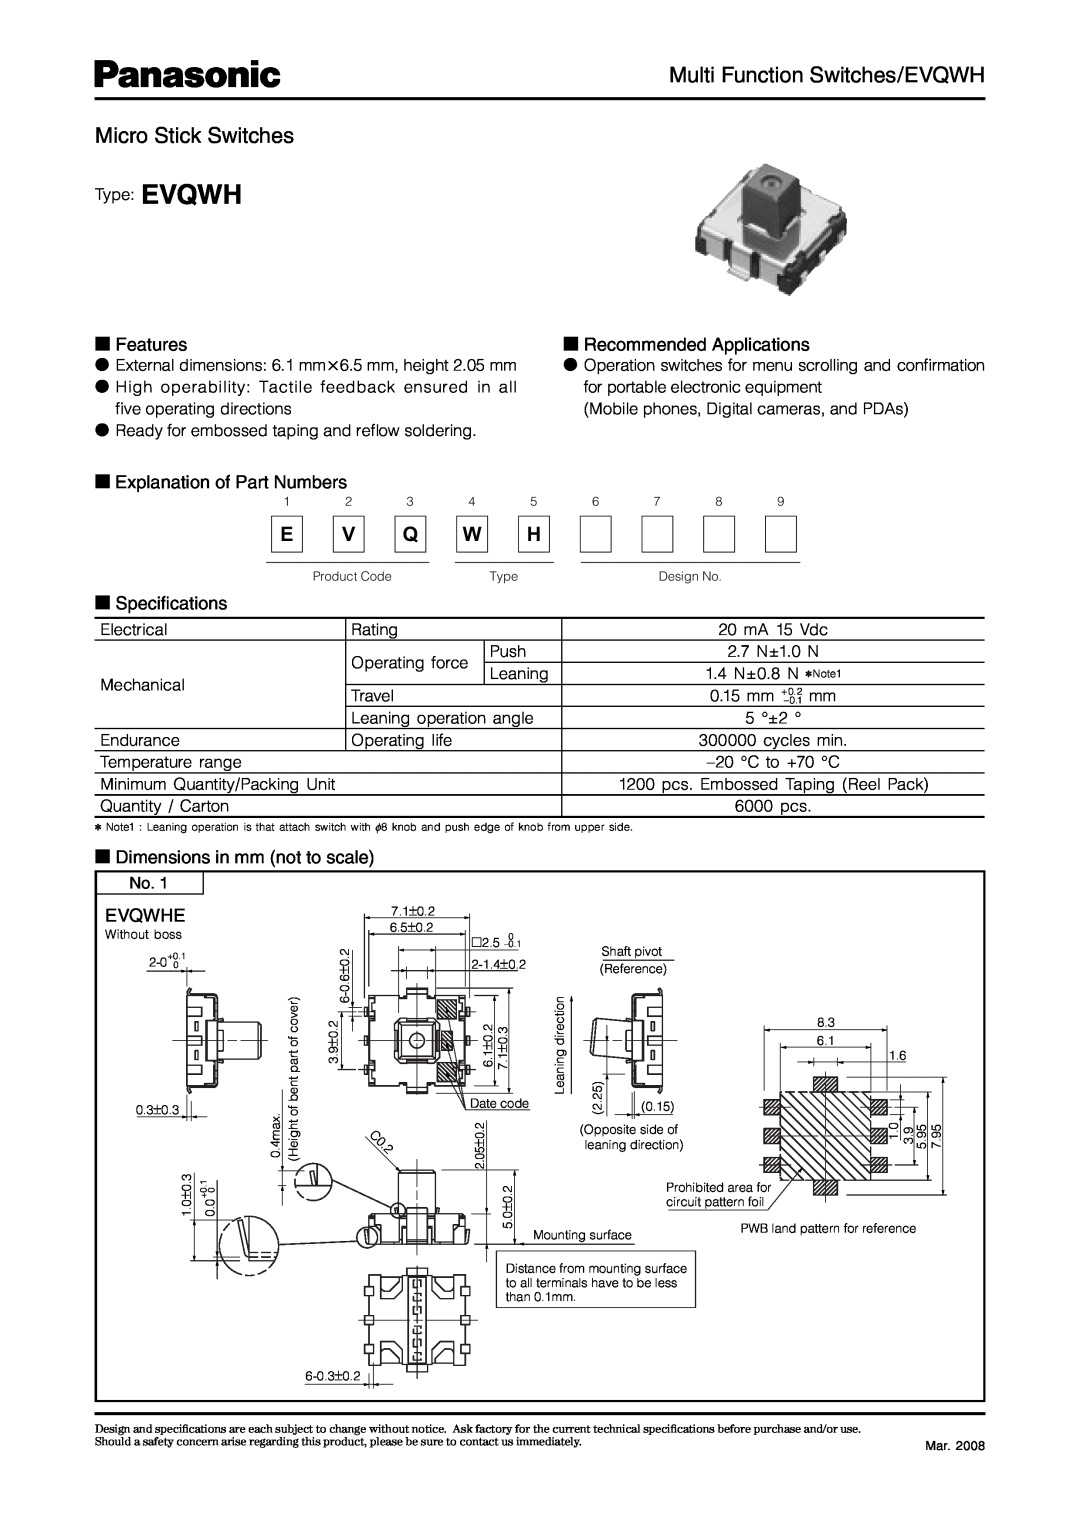 Panasonic specifications Multi Function Switches/EVQWH Micro Stick Switches, Features, Recommended Applications, Evqwhe 